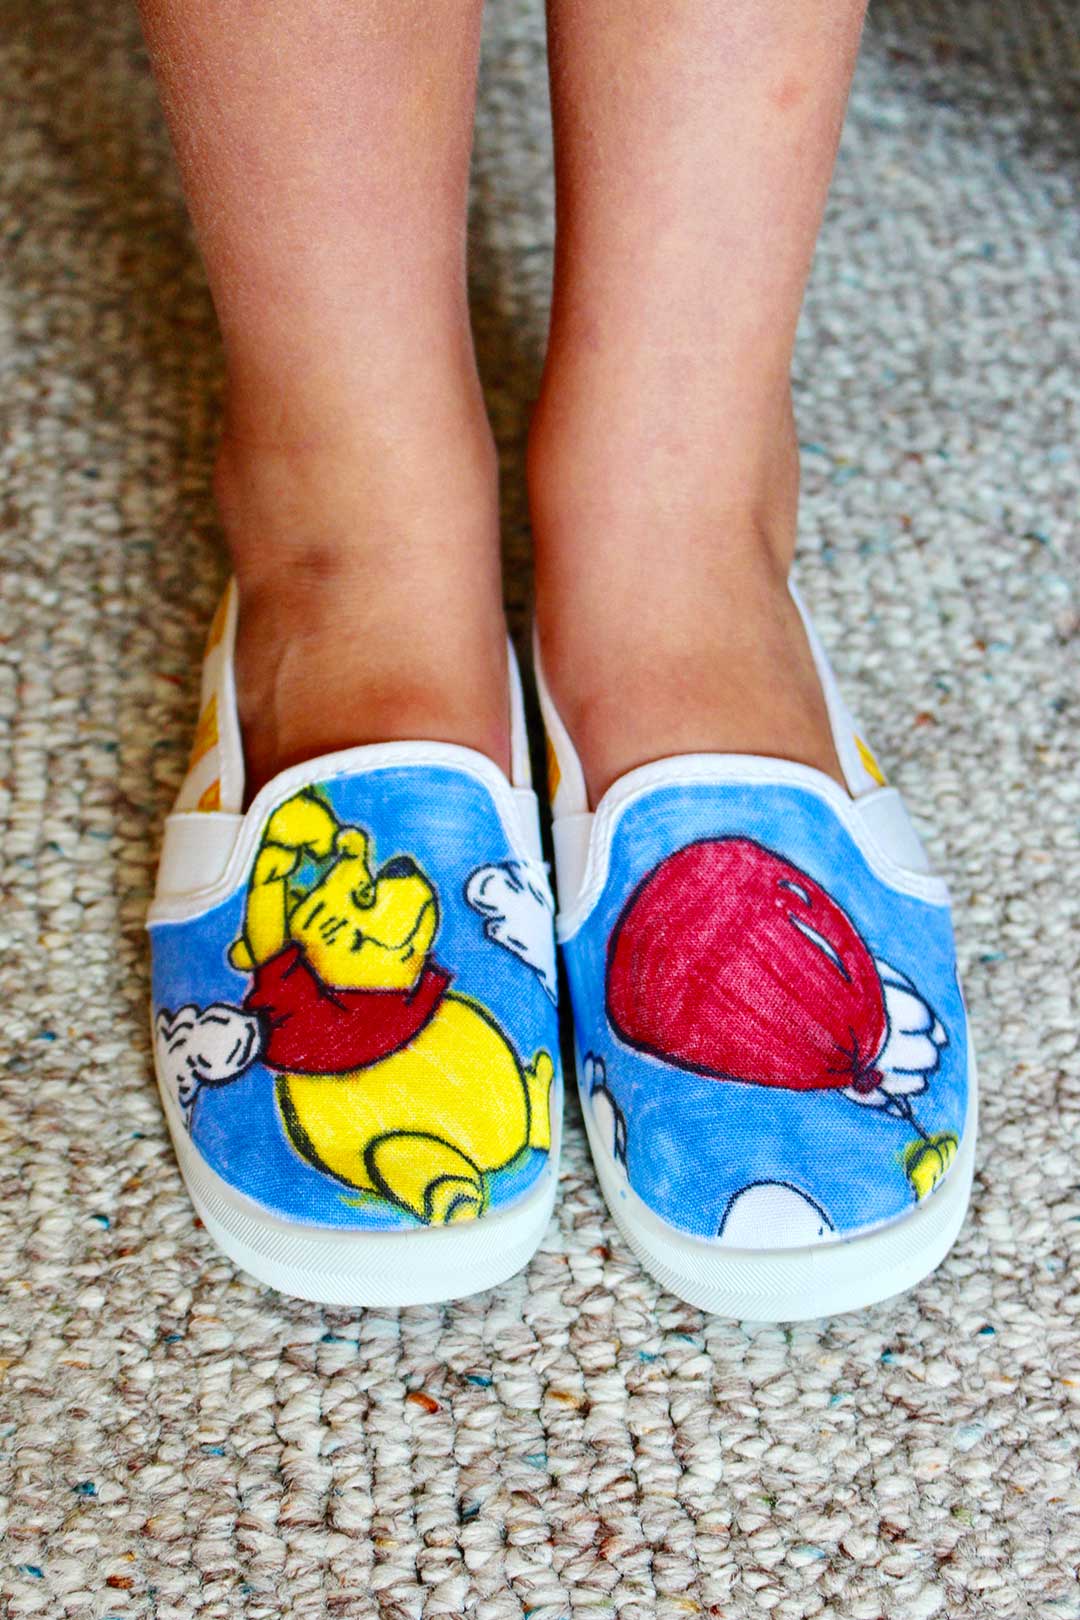 A child wearing a pair of canvas shoes decorated with a marker colored picture of Winnie the Pooh and a balloon.